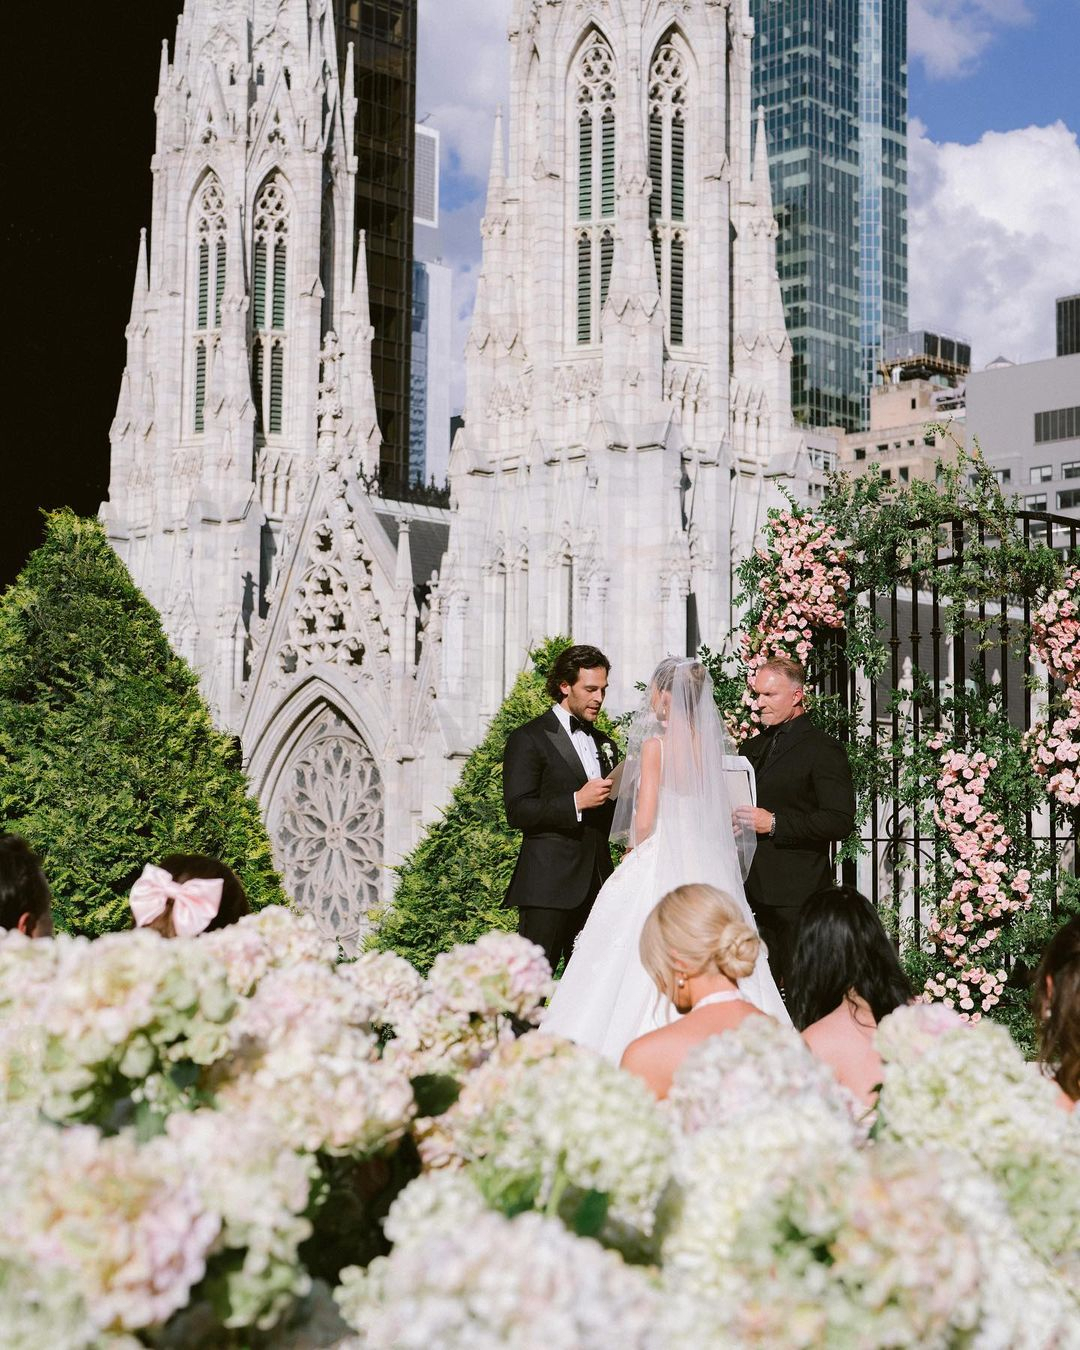 10 Best Wedding Venues For Rent in New York, NY